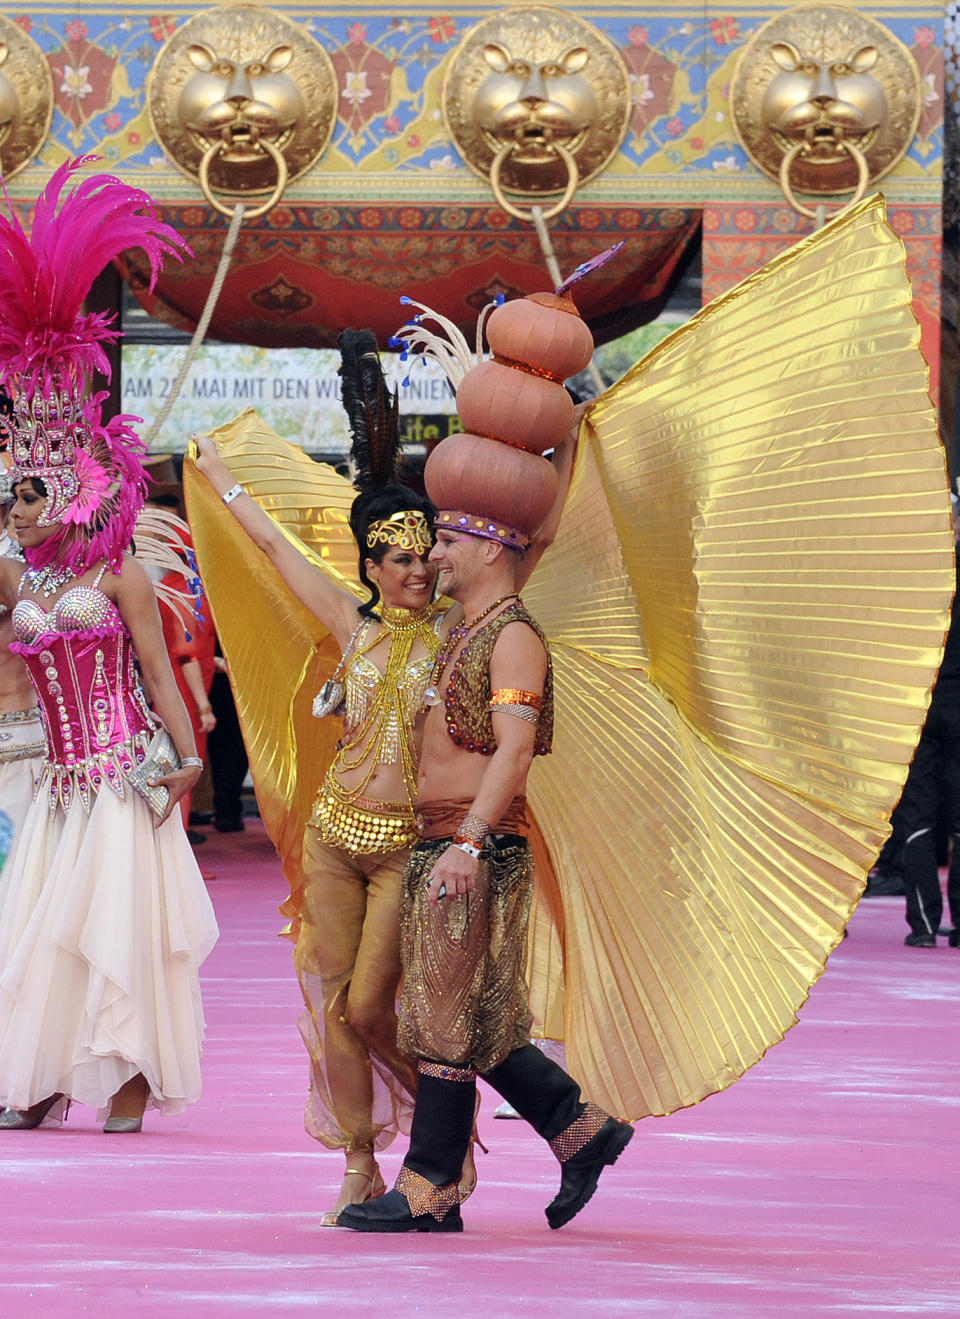 Guests in fancy costumes arrive for the opening ceremony of the 21st Life Ball in front of city hall in Vienna, Austria, on Saturday, May 25, 2013. The Life Ball is a charity gala to raise money for people living with HIV and AIDS. (AP Photo/Hans Punz)